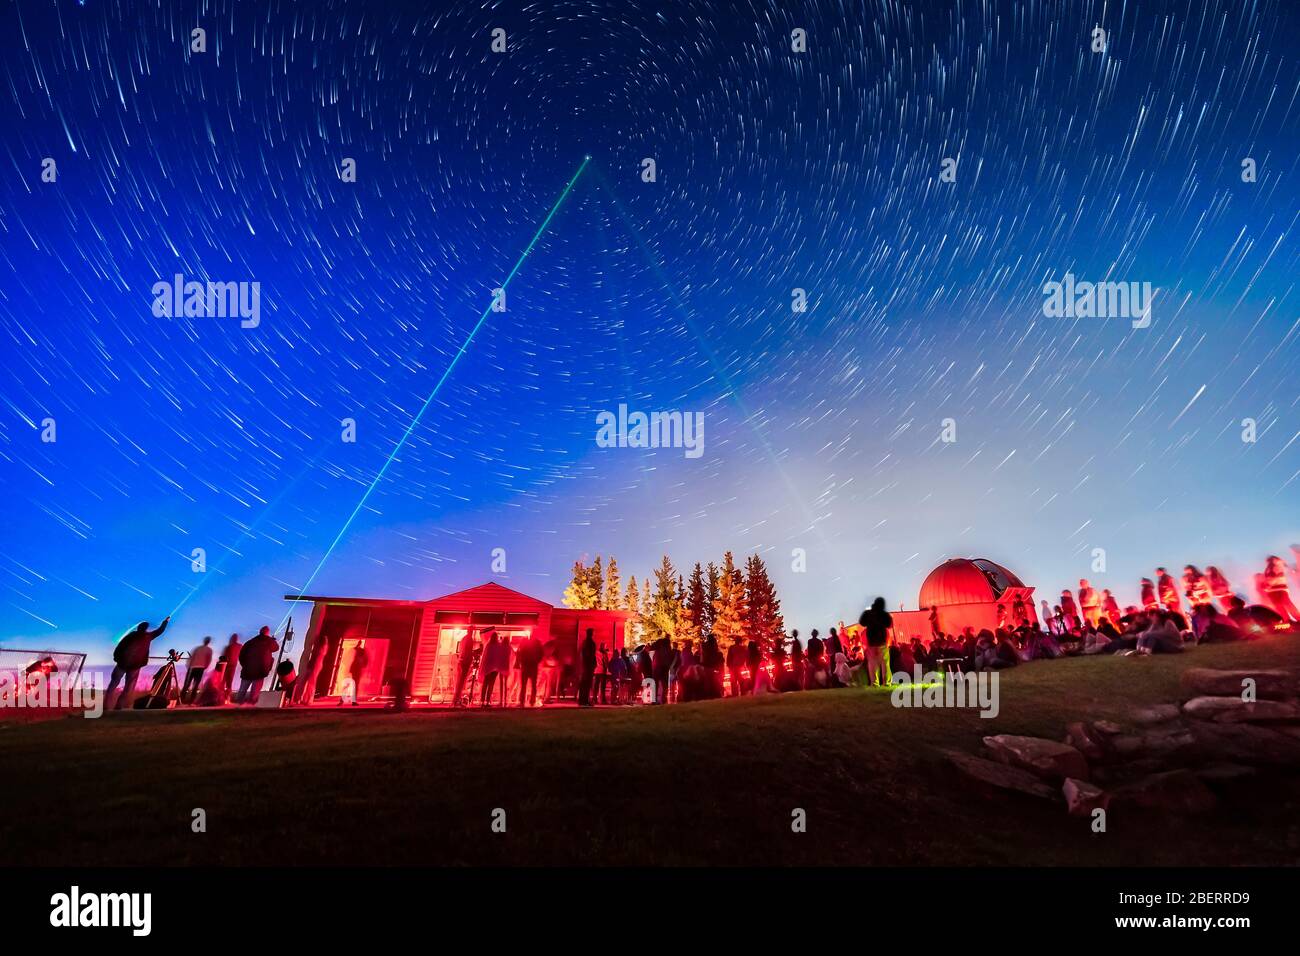 Laser-guided sky tour at the Rothney Astrophysical Observatory in Canada. Stock Photo